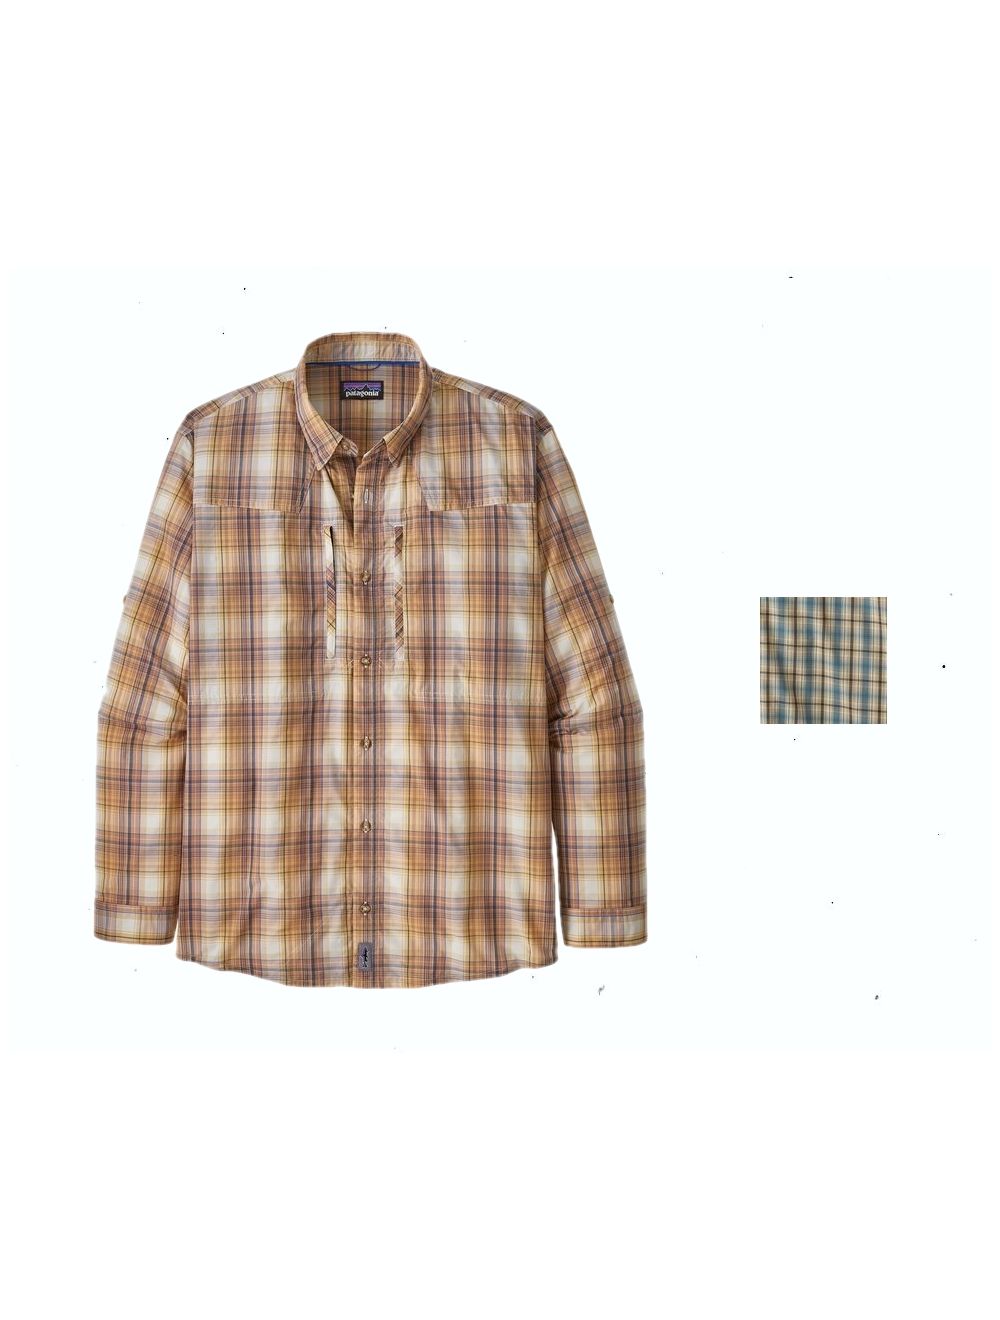 Button Up vs Button Down  Differences in Men's Shirts - Nimble Made